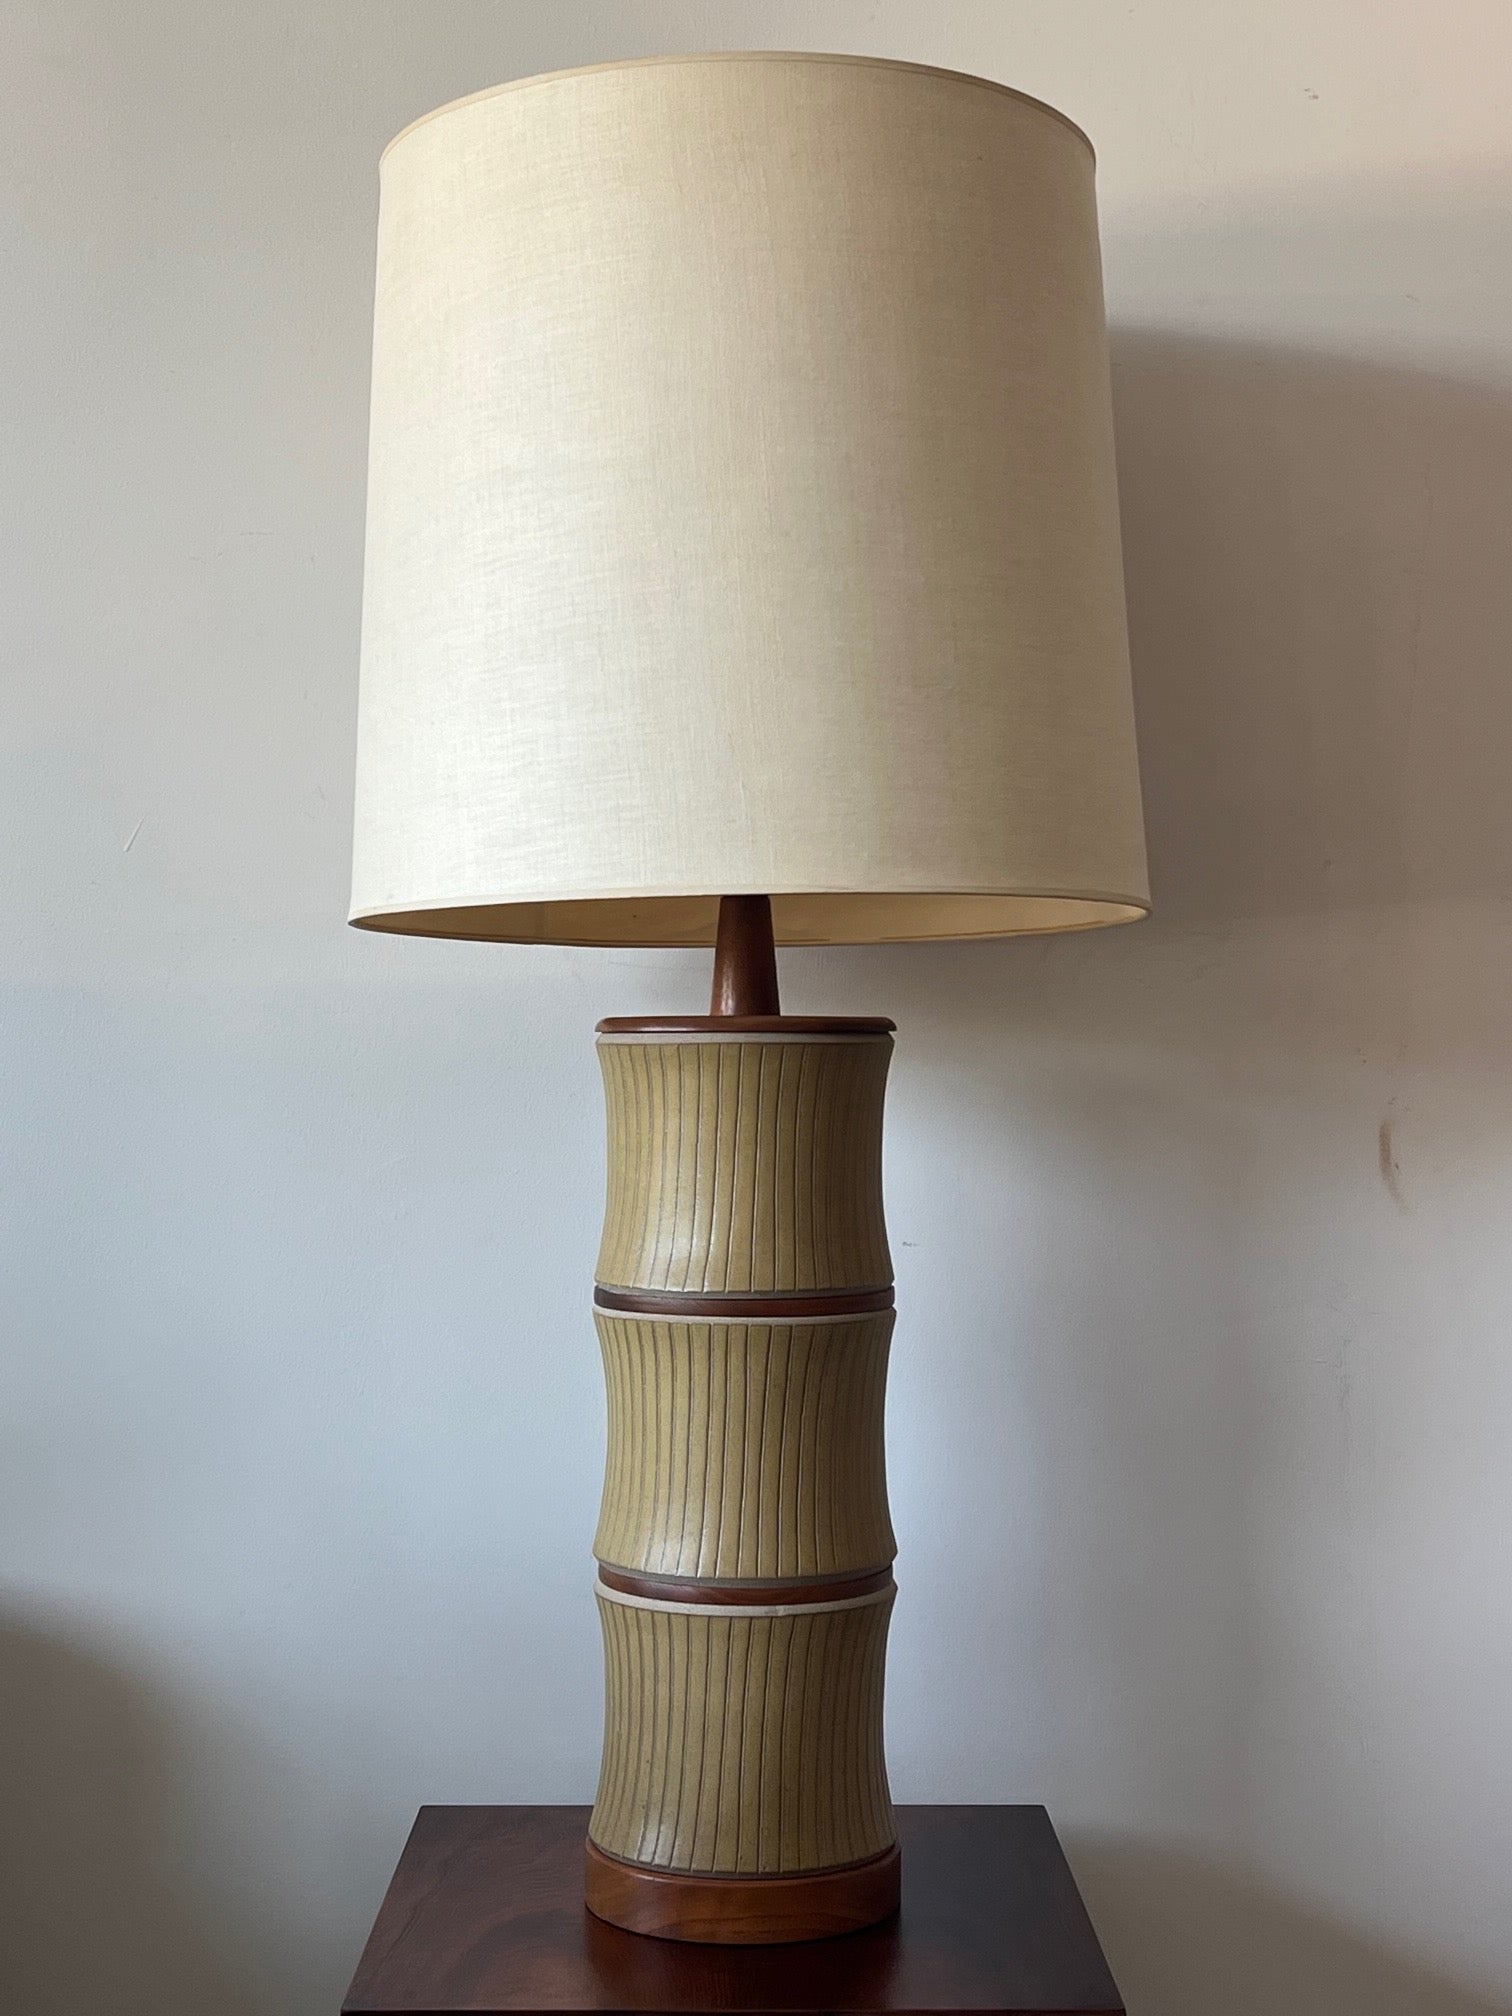 An outstanding stacked stoneware and walnut lamp by Gordon and Jane Martz ca' 1960's. Model 221 with yellow satin glaze and incise decoration. Original shade, original finial, purchased from original owner.